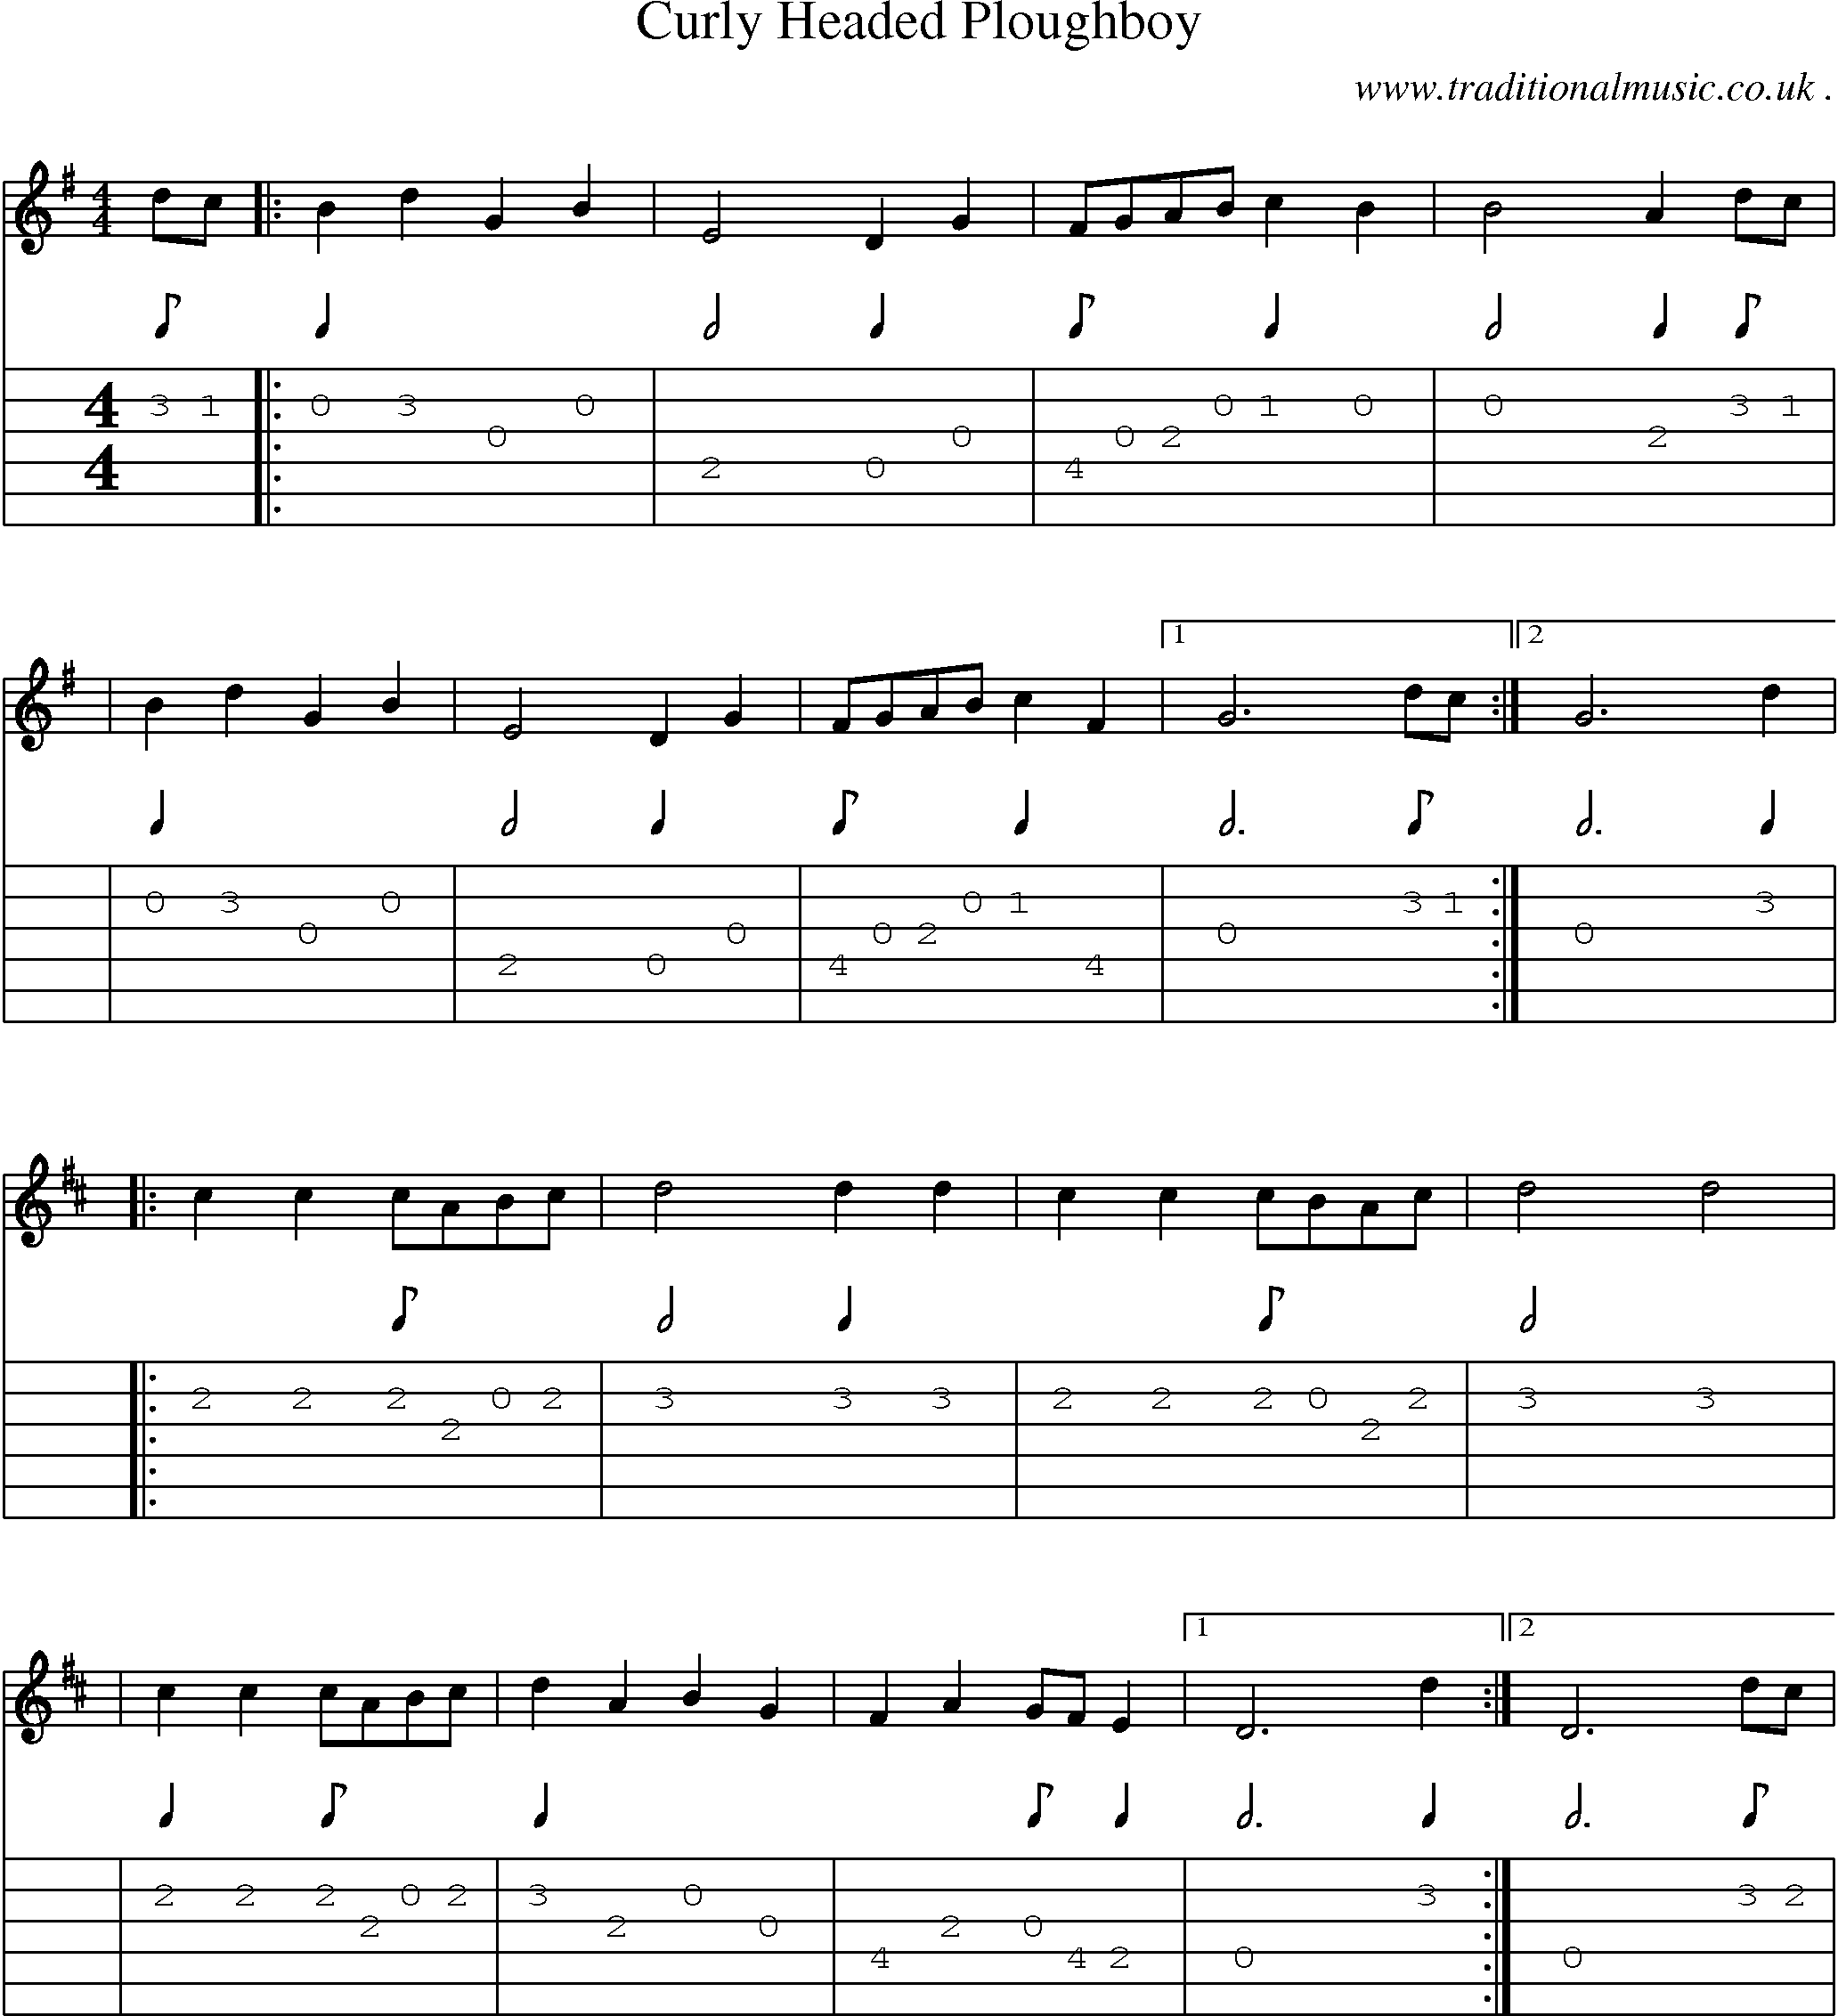 Sheet-Music and Guitar Tabs for Curly Headed Ploughboy